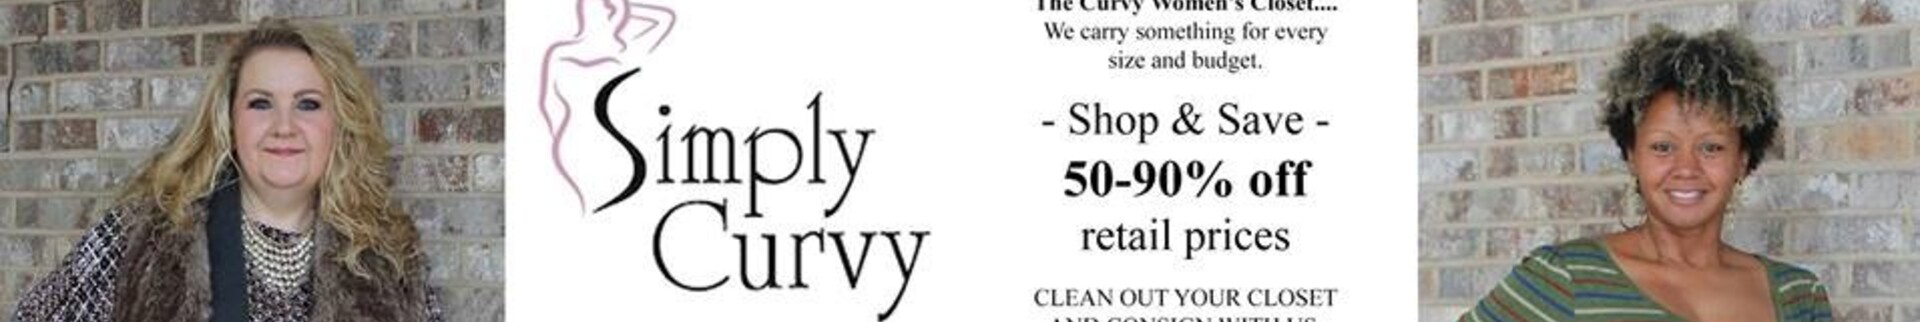 Simply Curvy Consignment's banner image.